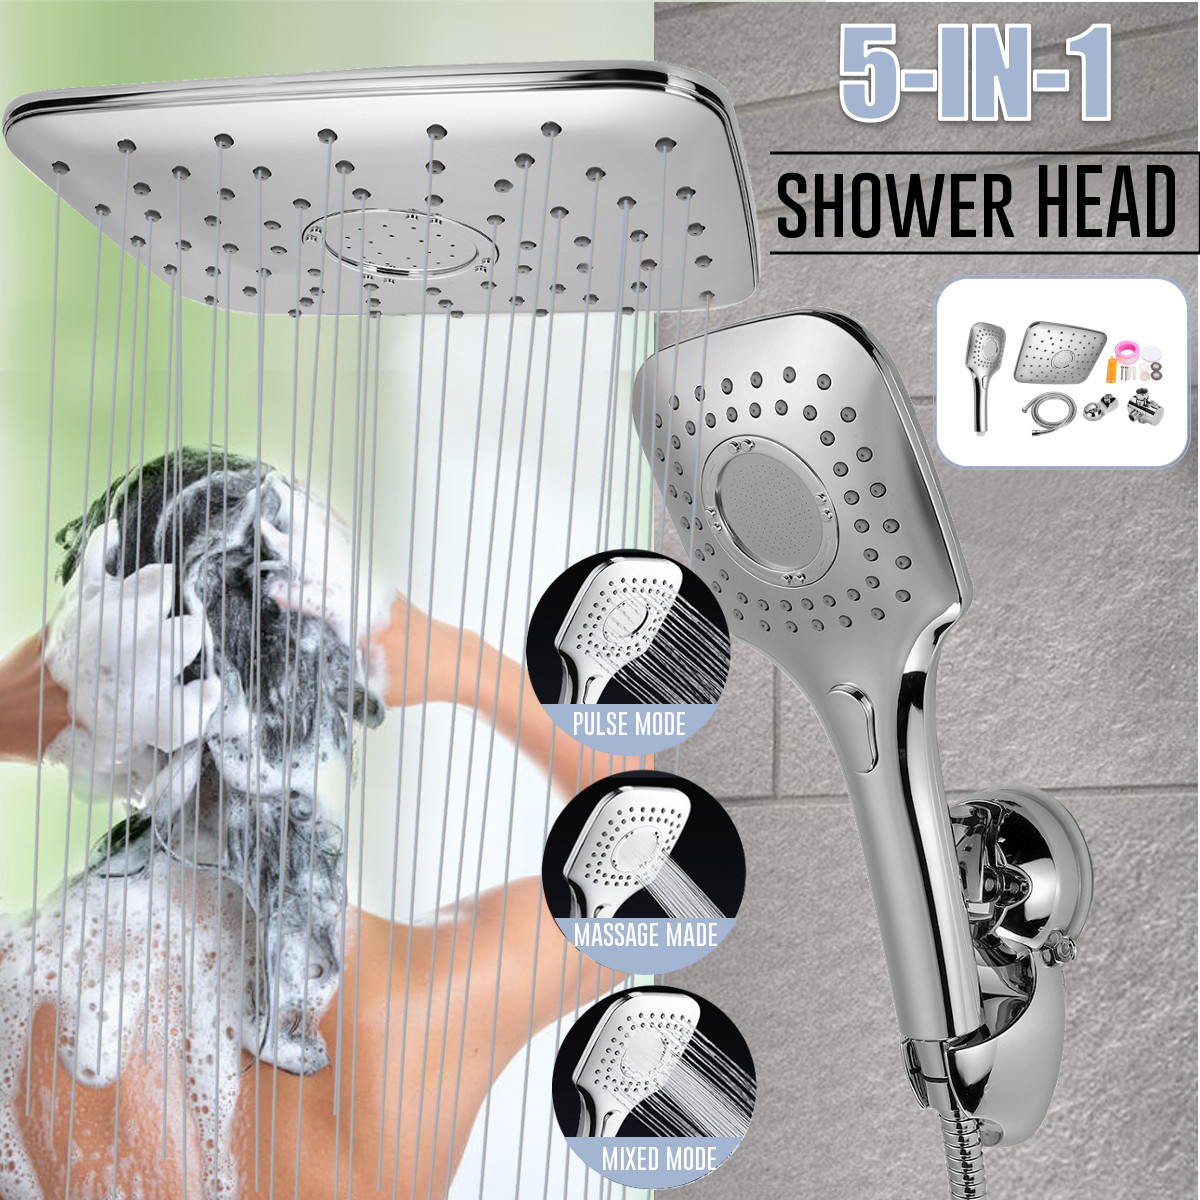 5-in-1-Rainfall-Handheld-Shower-Head-Combo-3-Level-Adjustable-Dual-Square-Hose-1825049-1